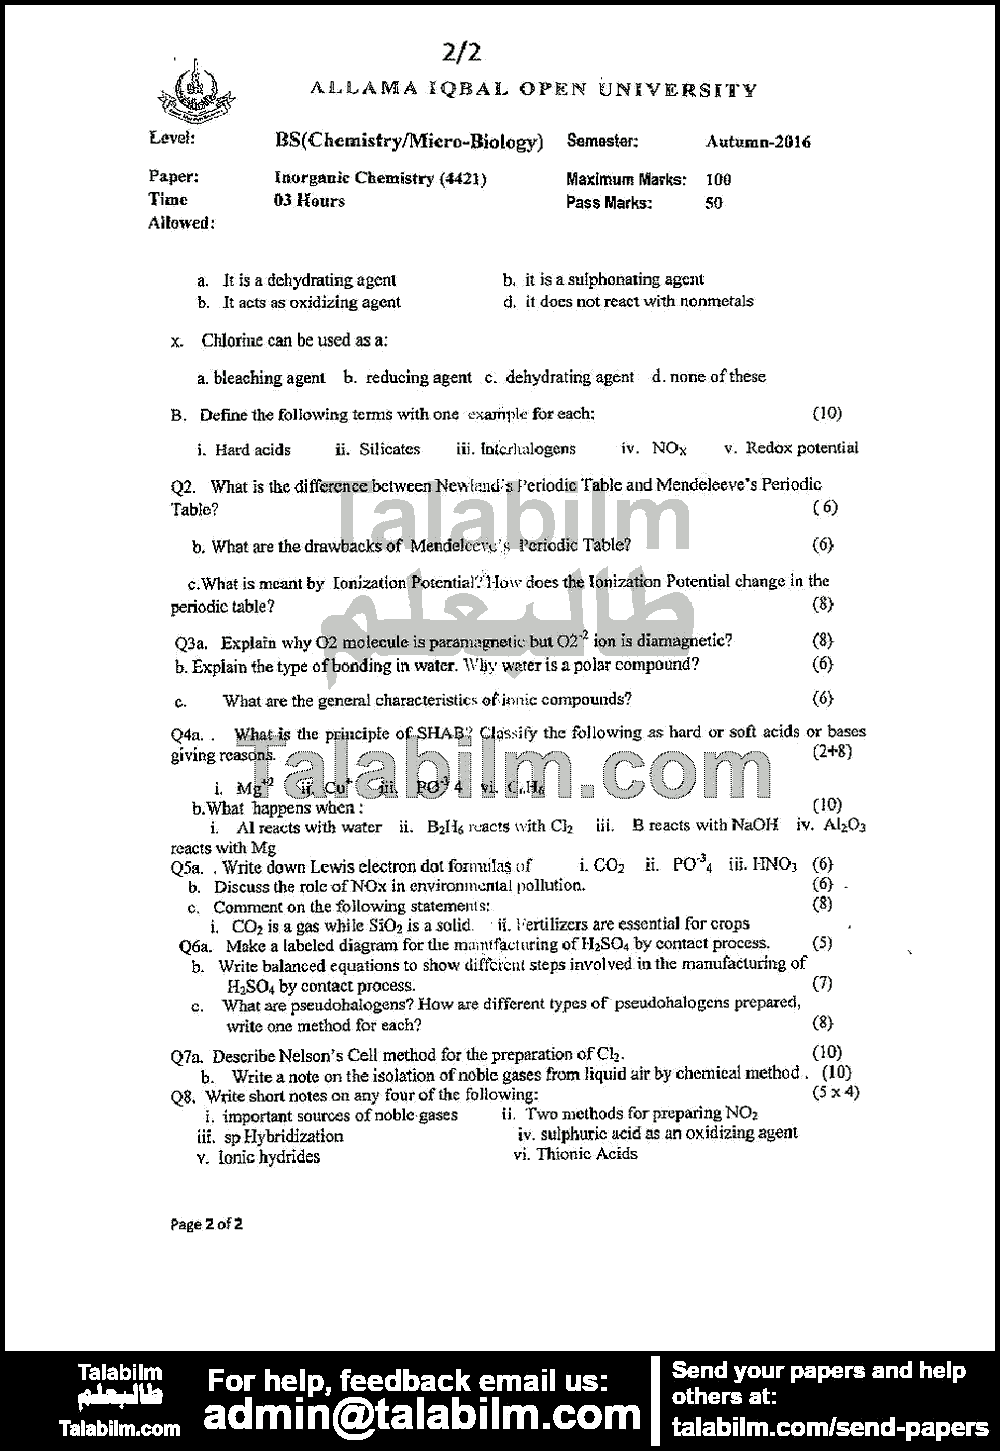 Inorganic Chemistry 4421 past paper for Autumn 2016 Page No. 2